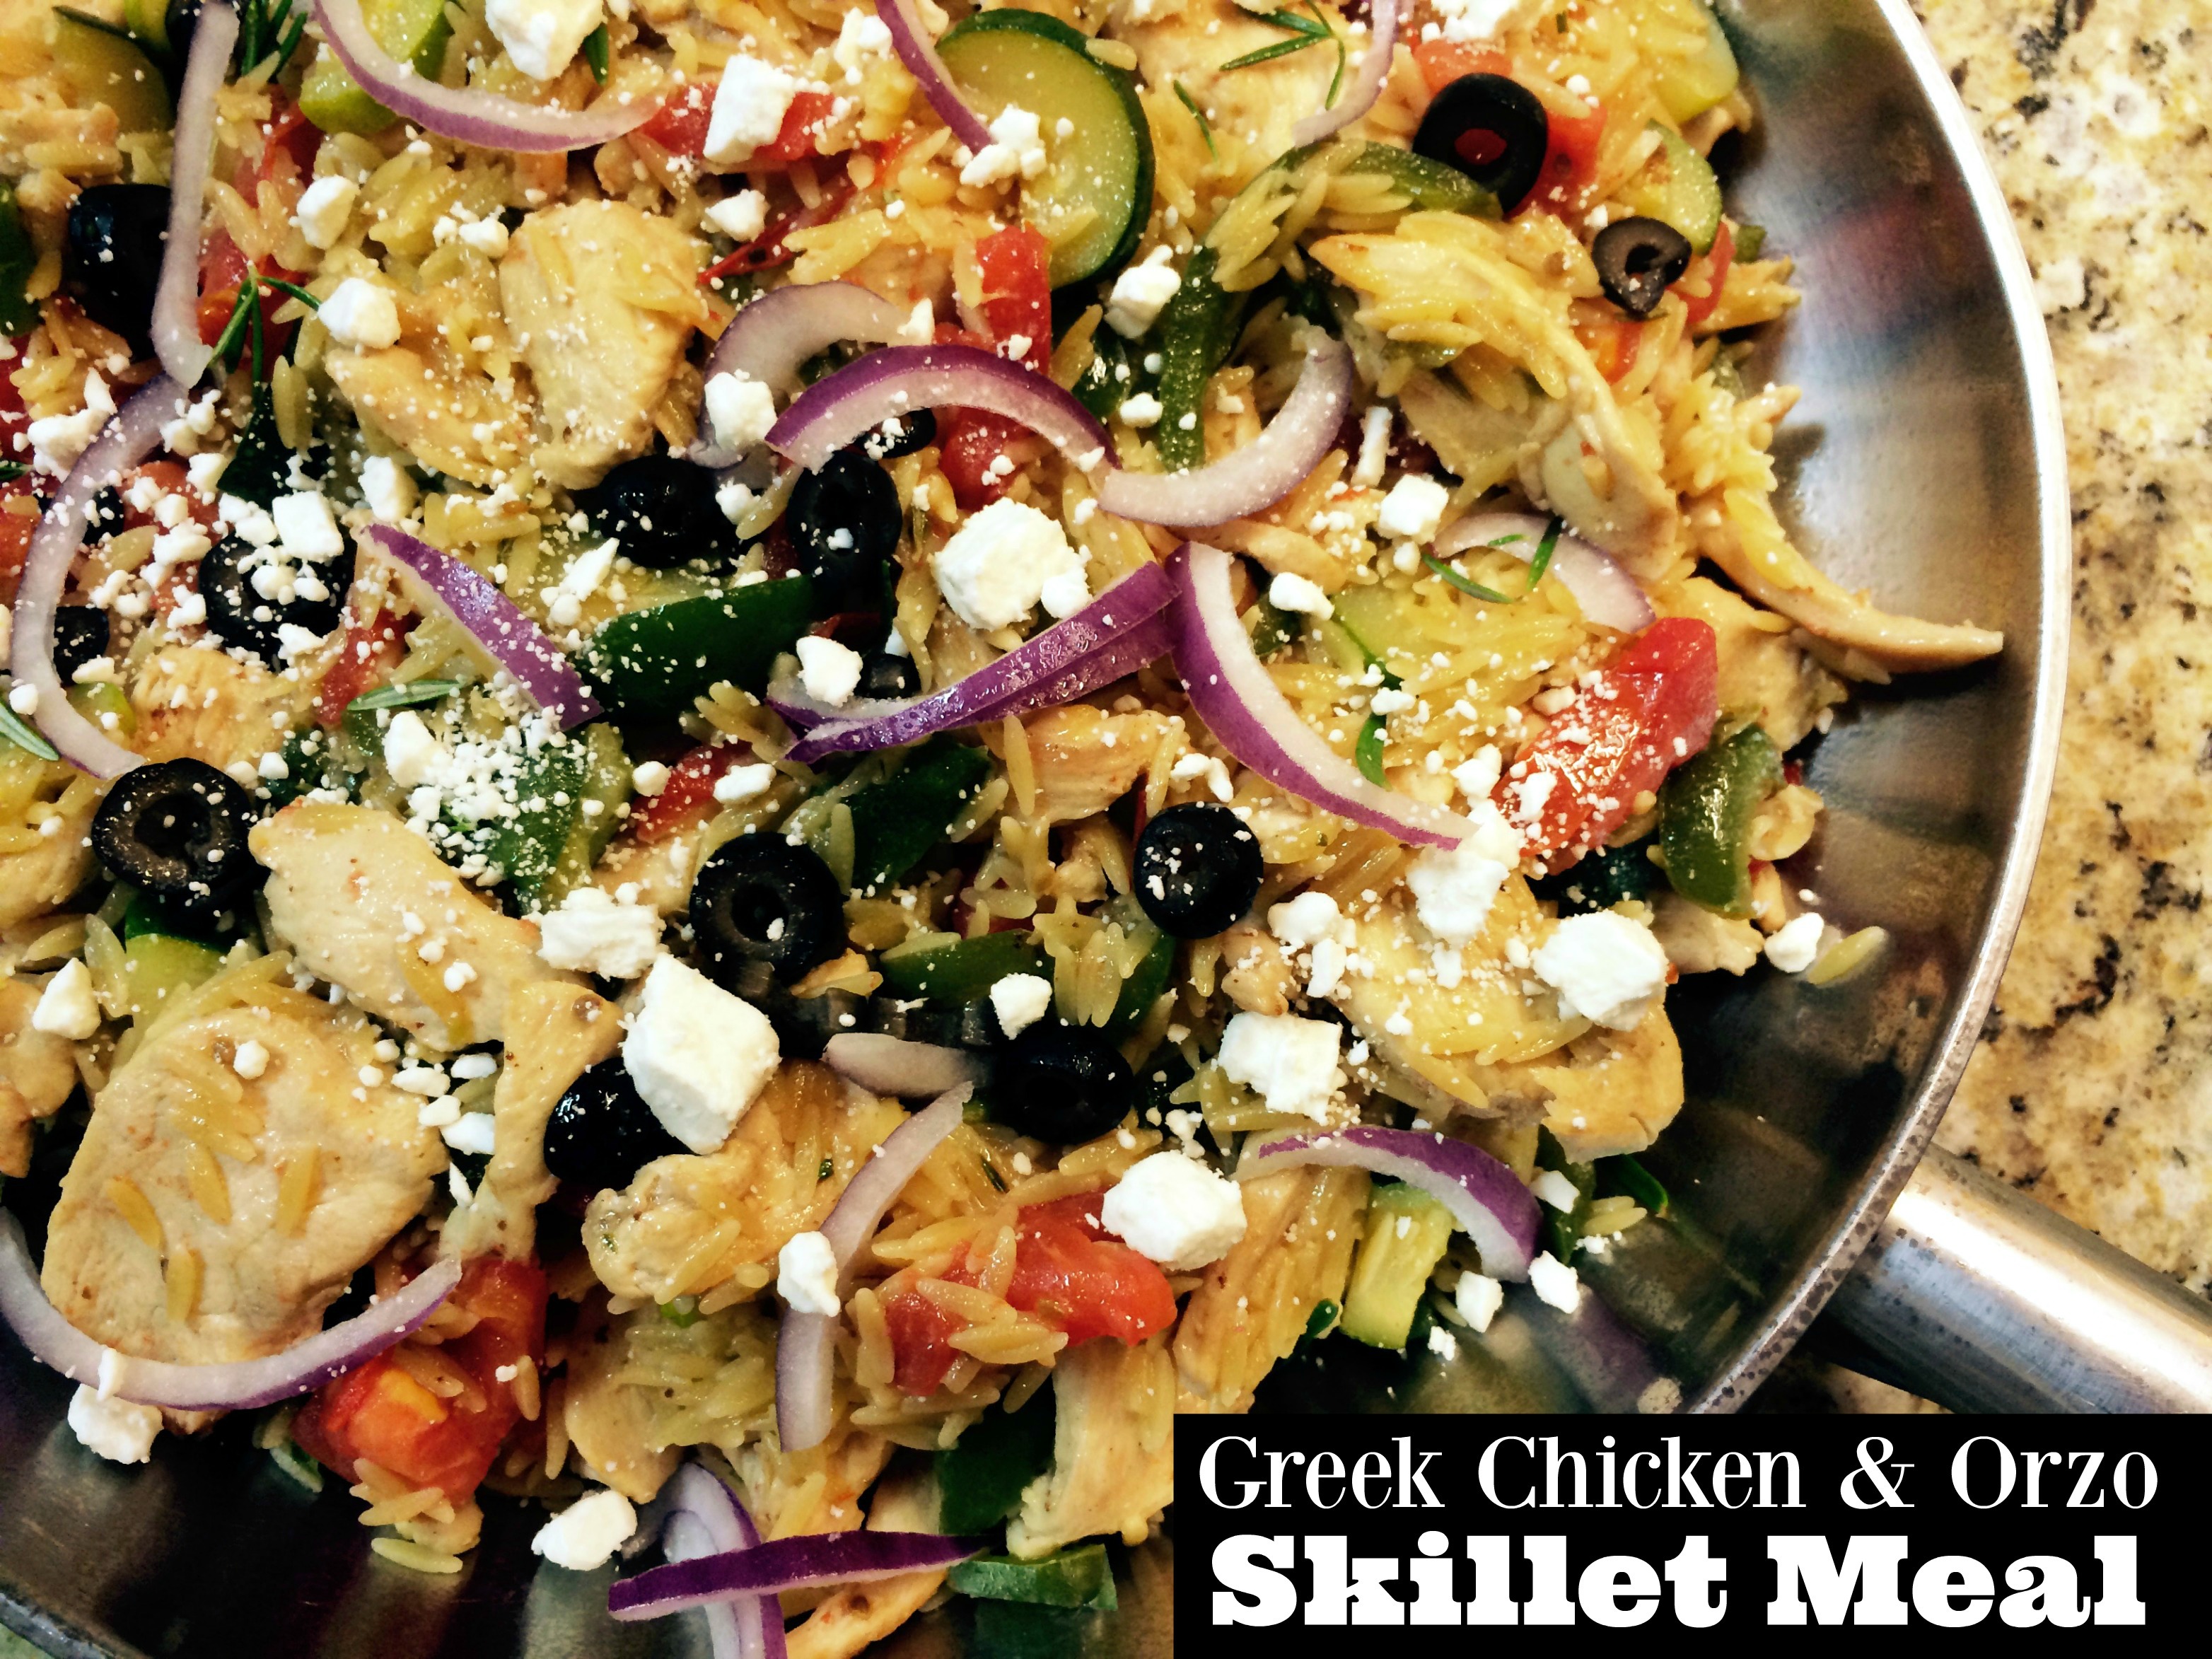 Greek Chicken & Orzo Skillet Meal